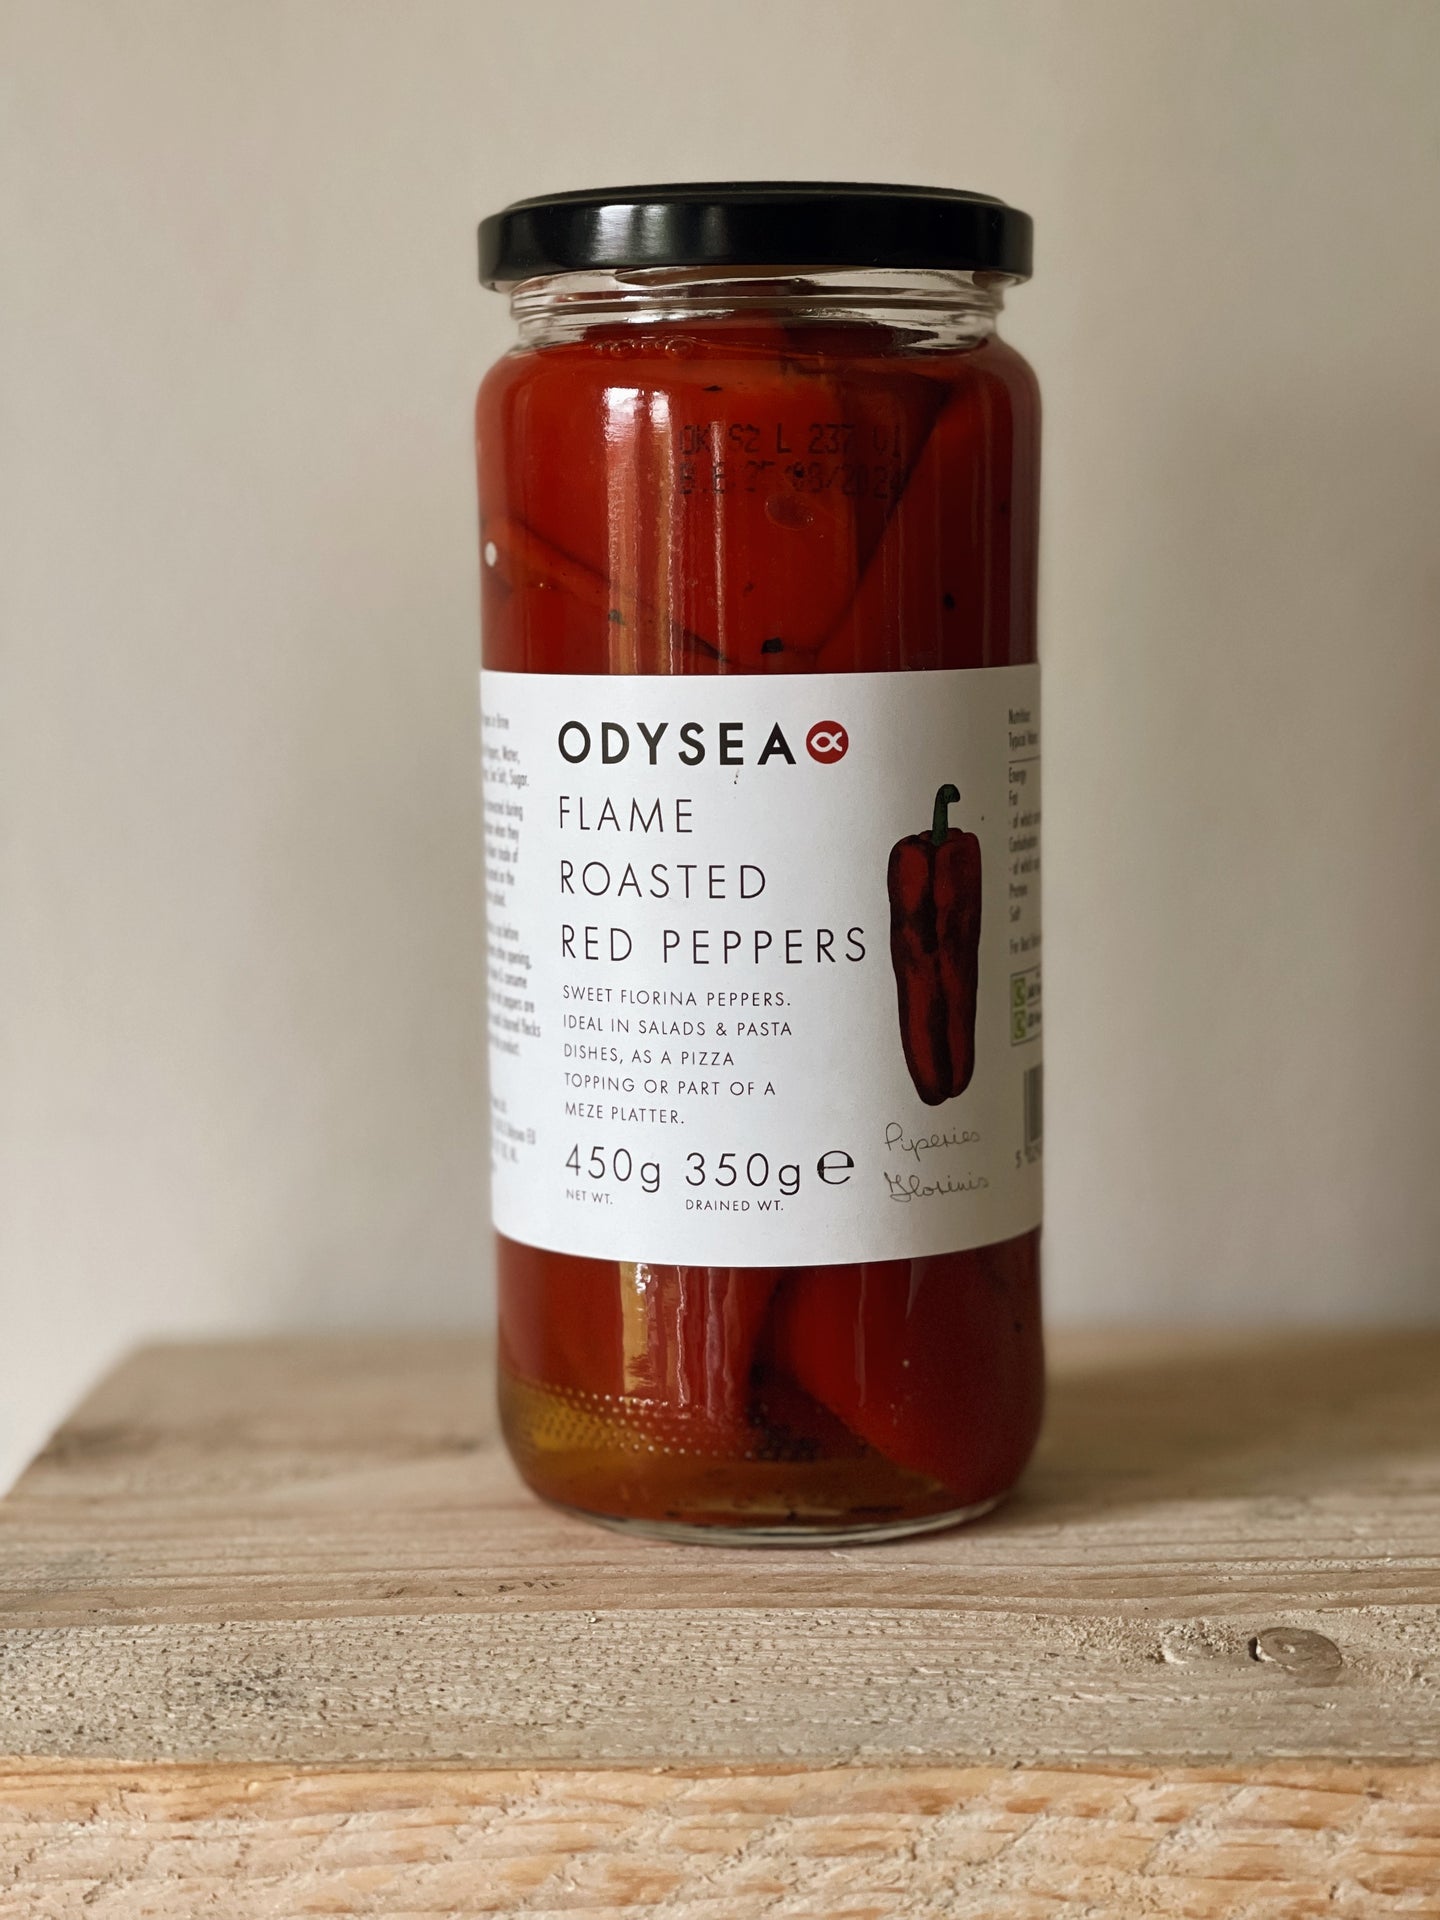 Flame roasted red peppers